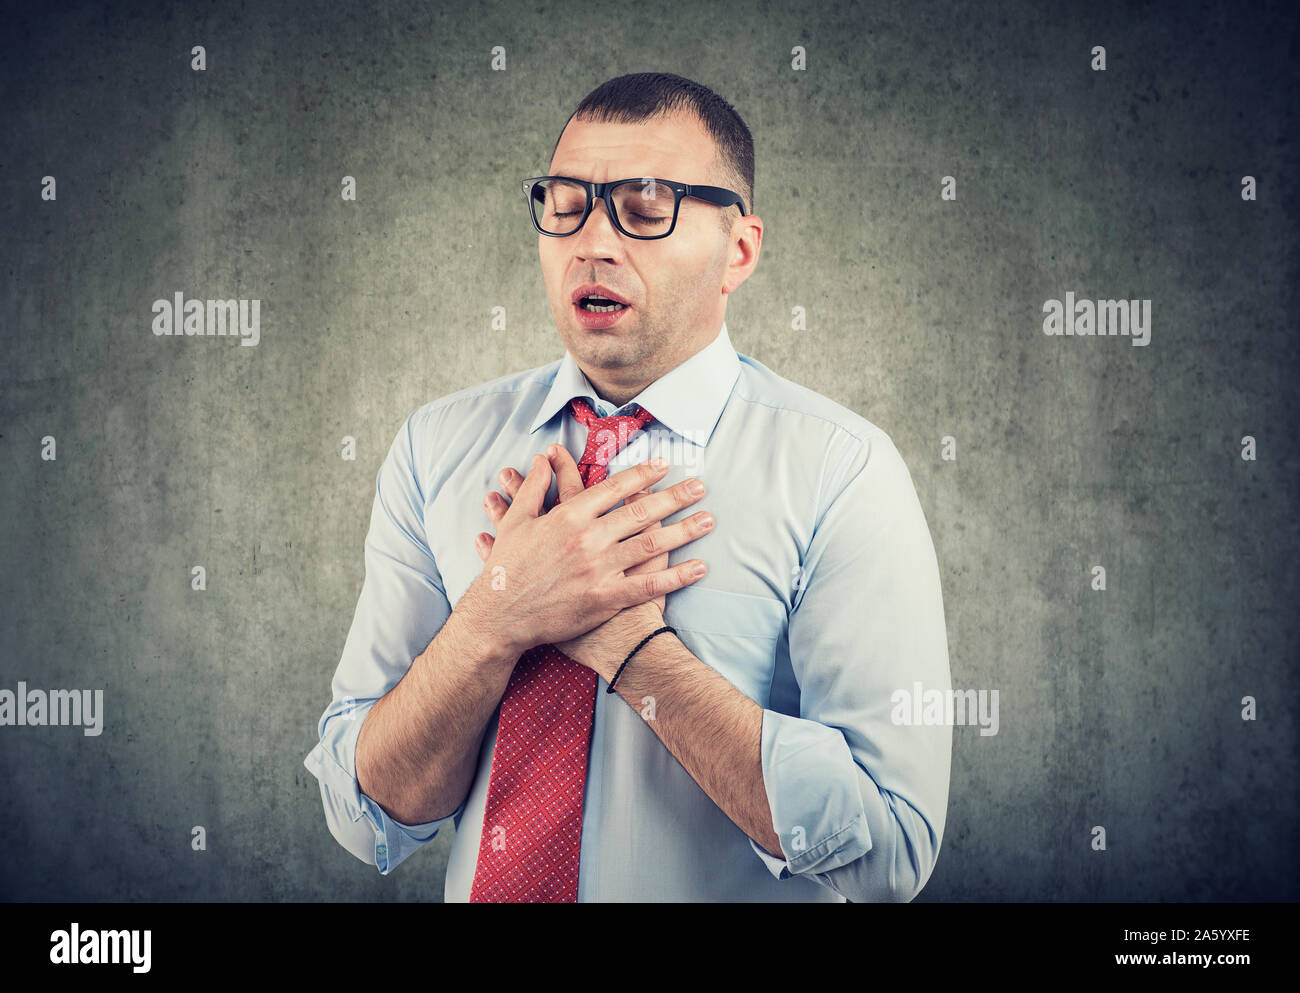 Young business man having asthma attack or chest pain Stock Photo